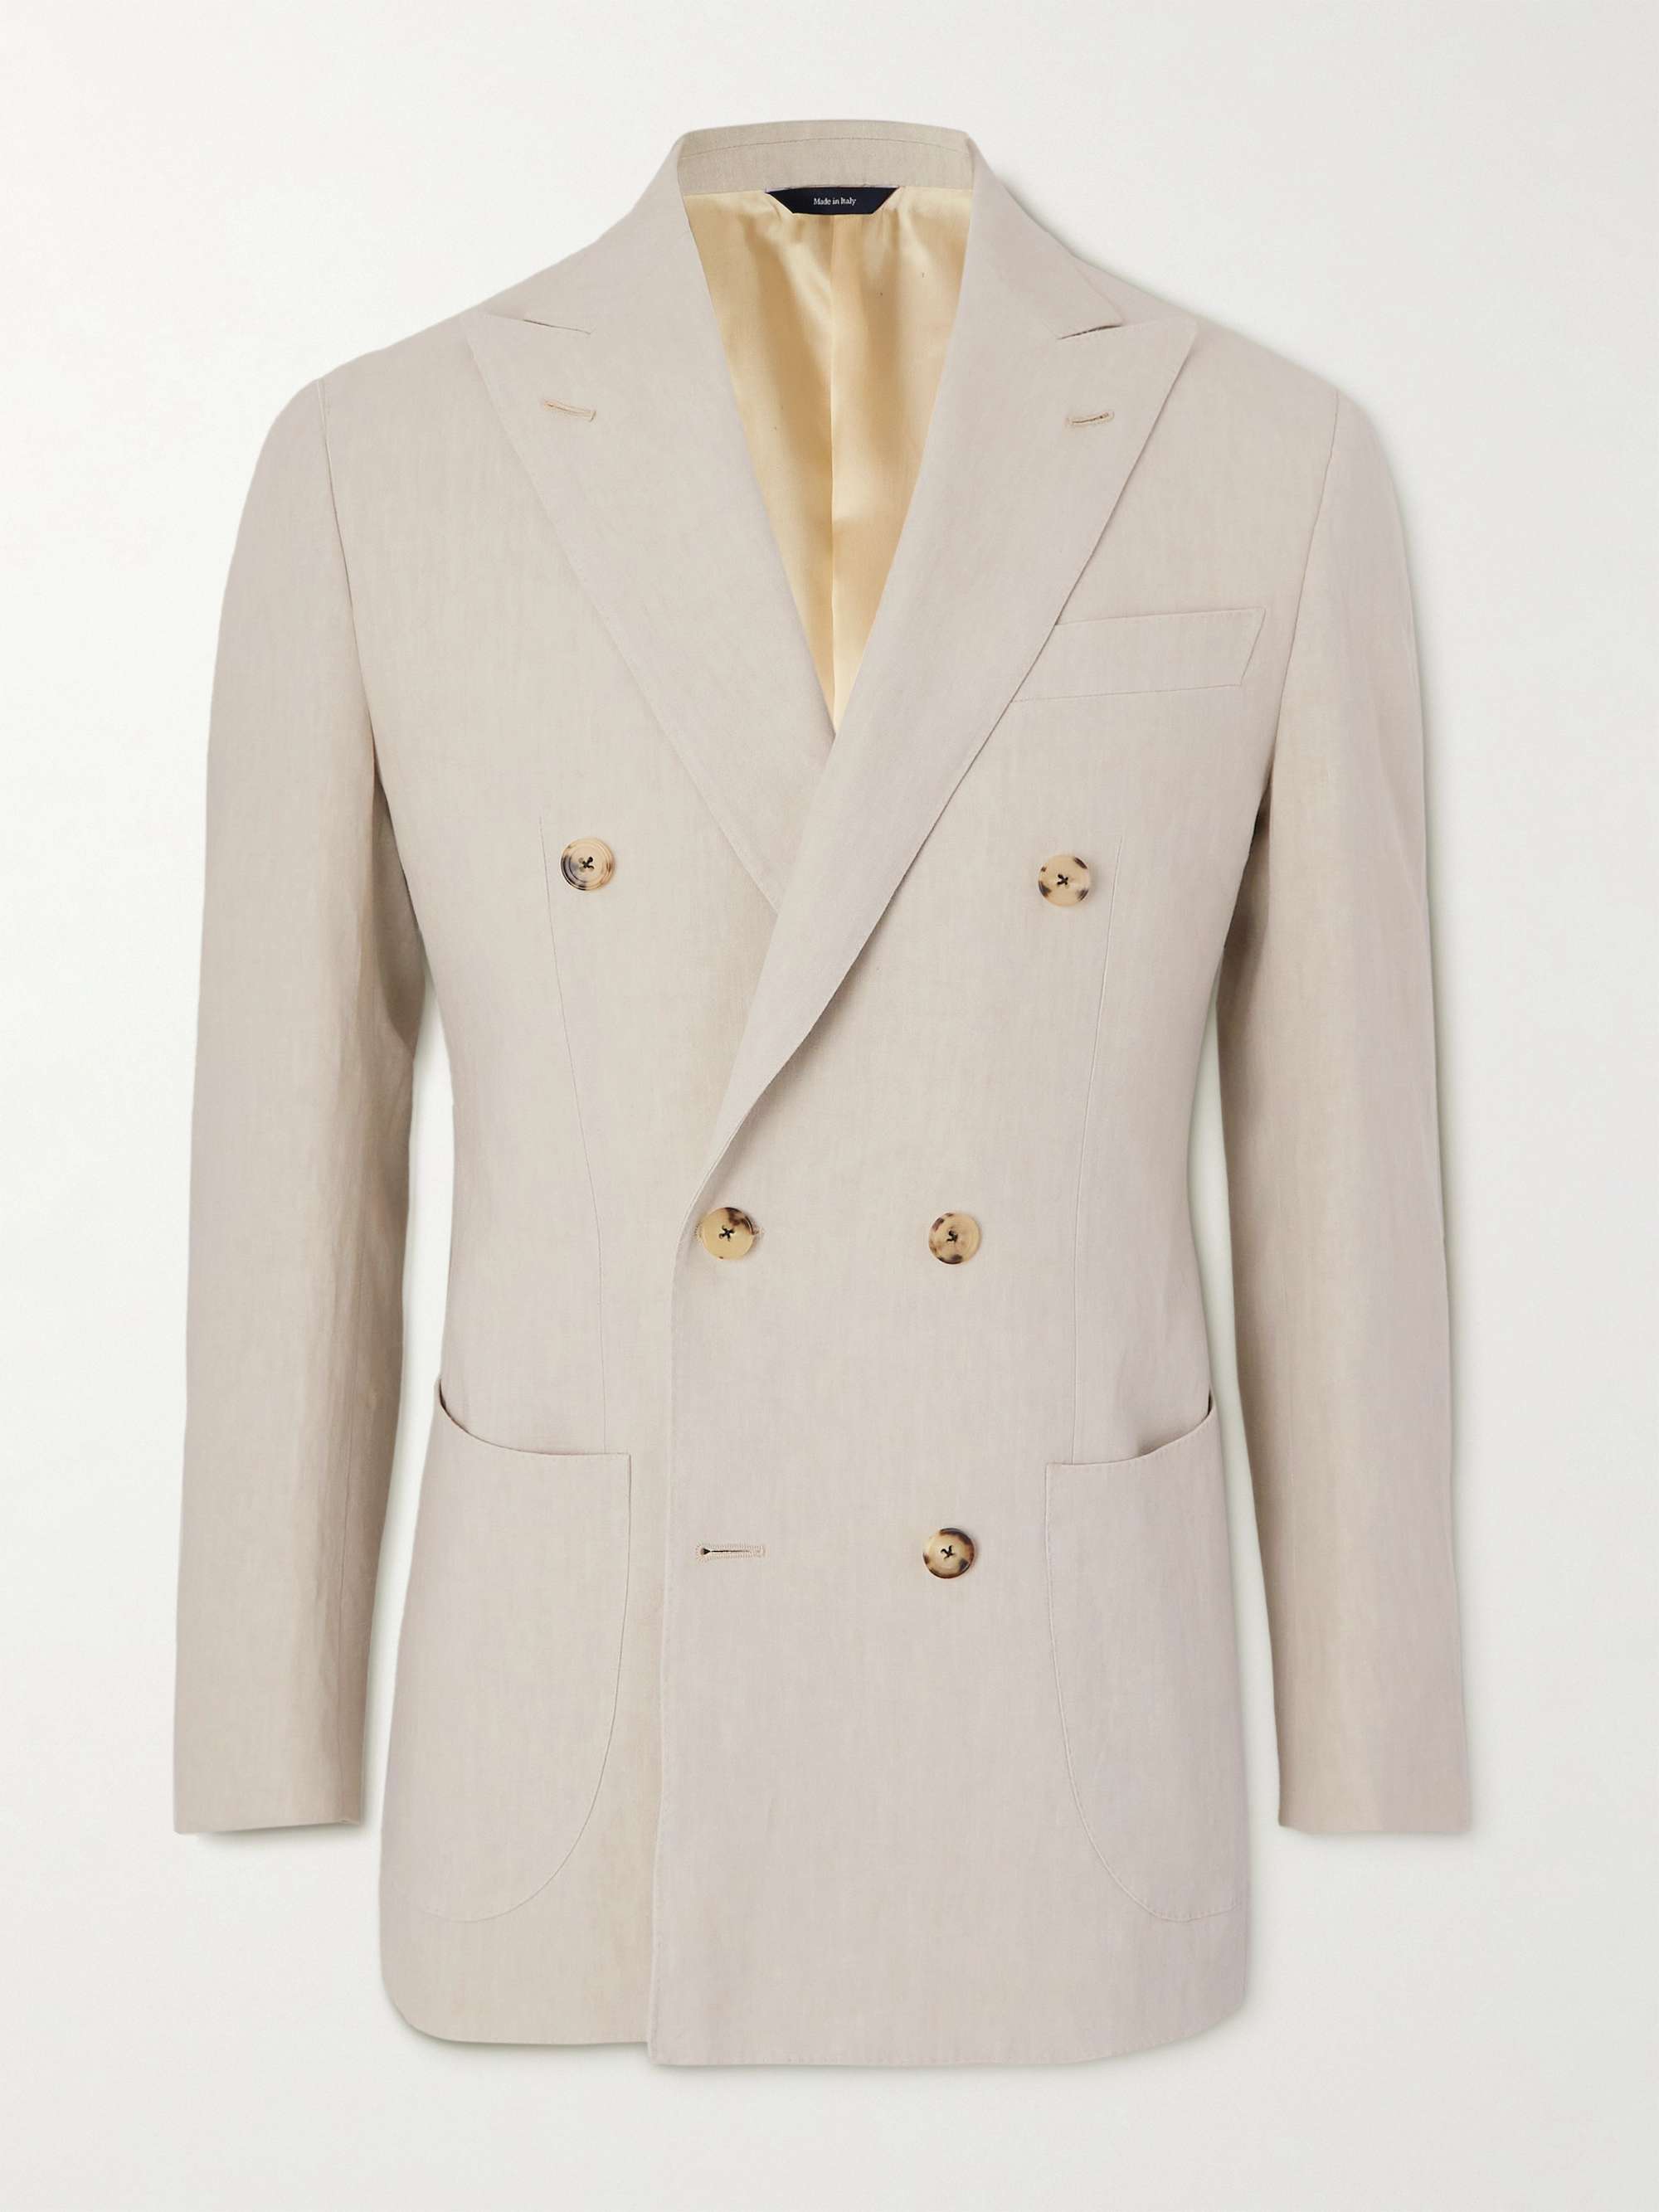 THOM SWEENEY Double-Breasted Linen Suit Jacket